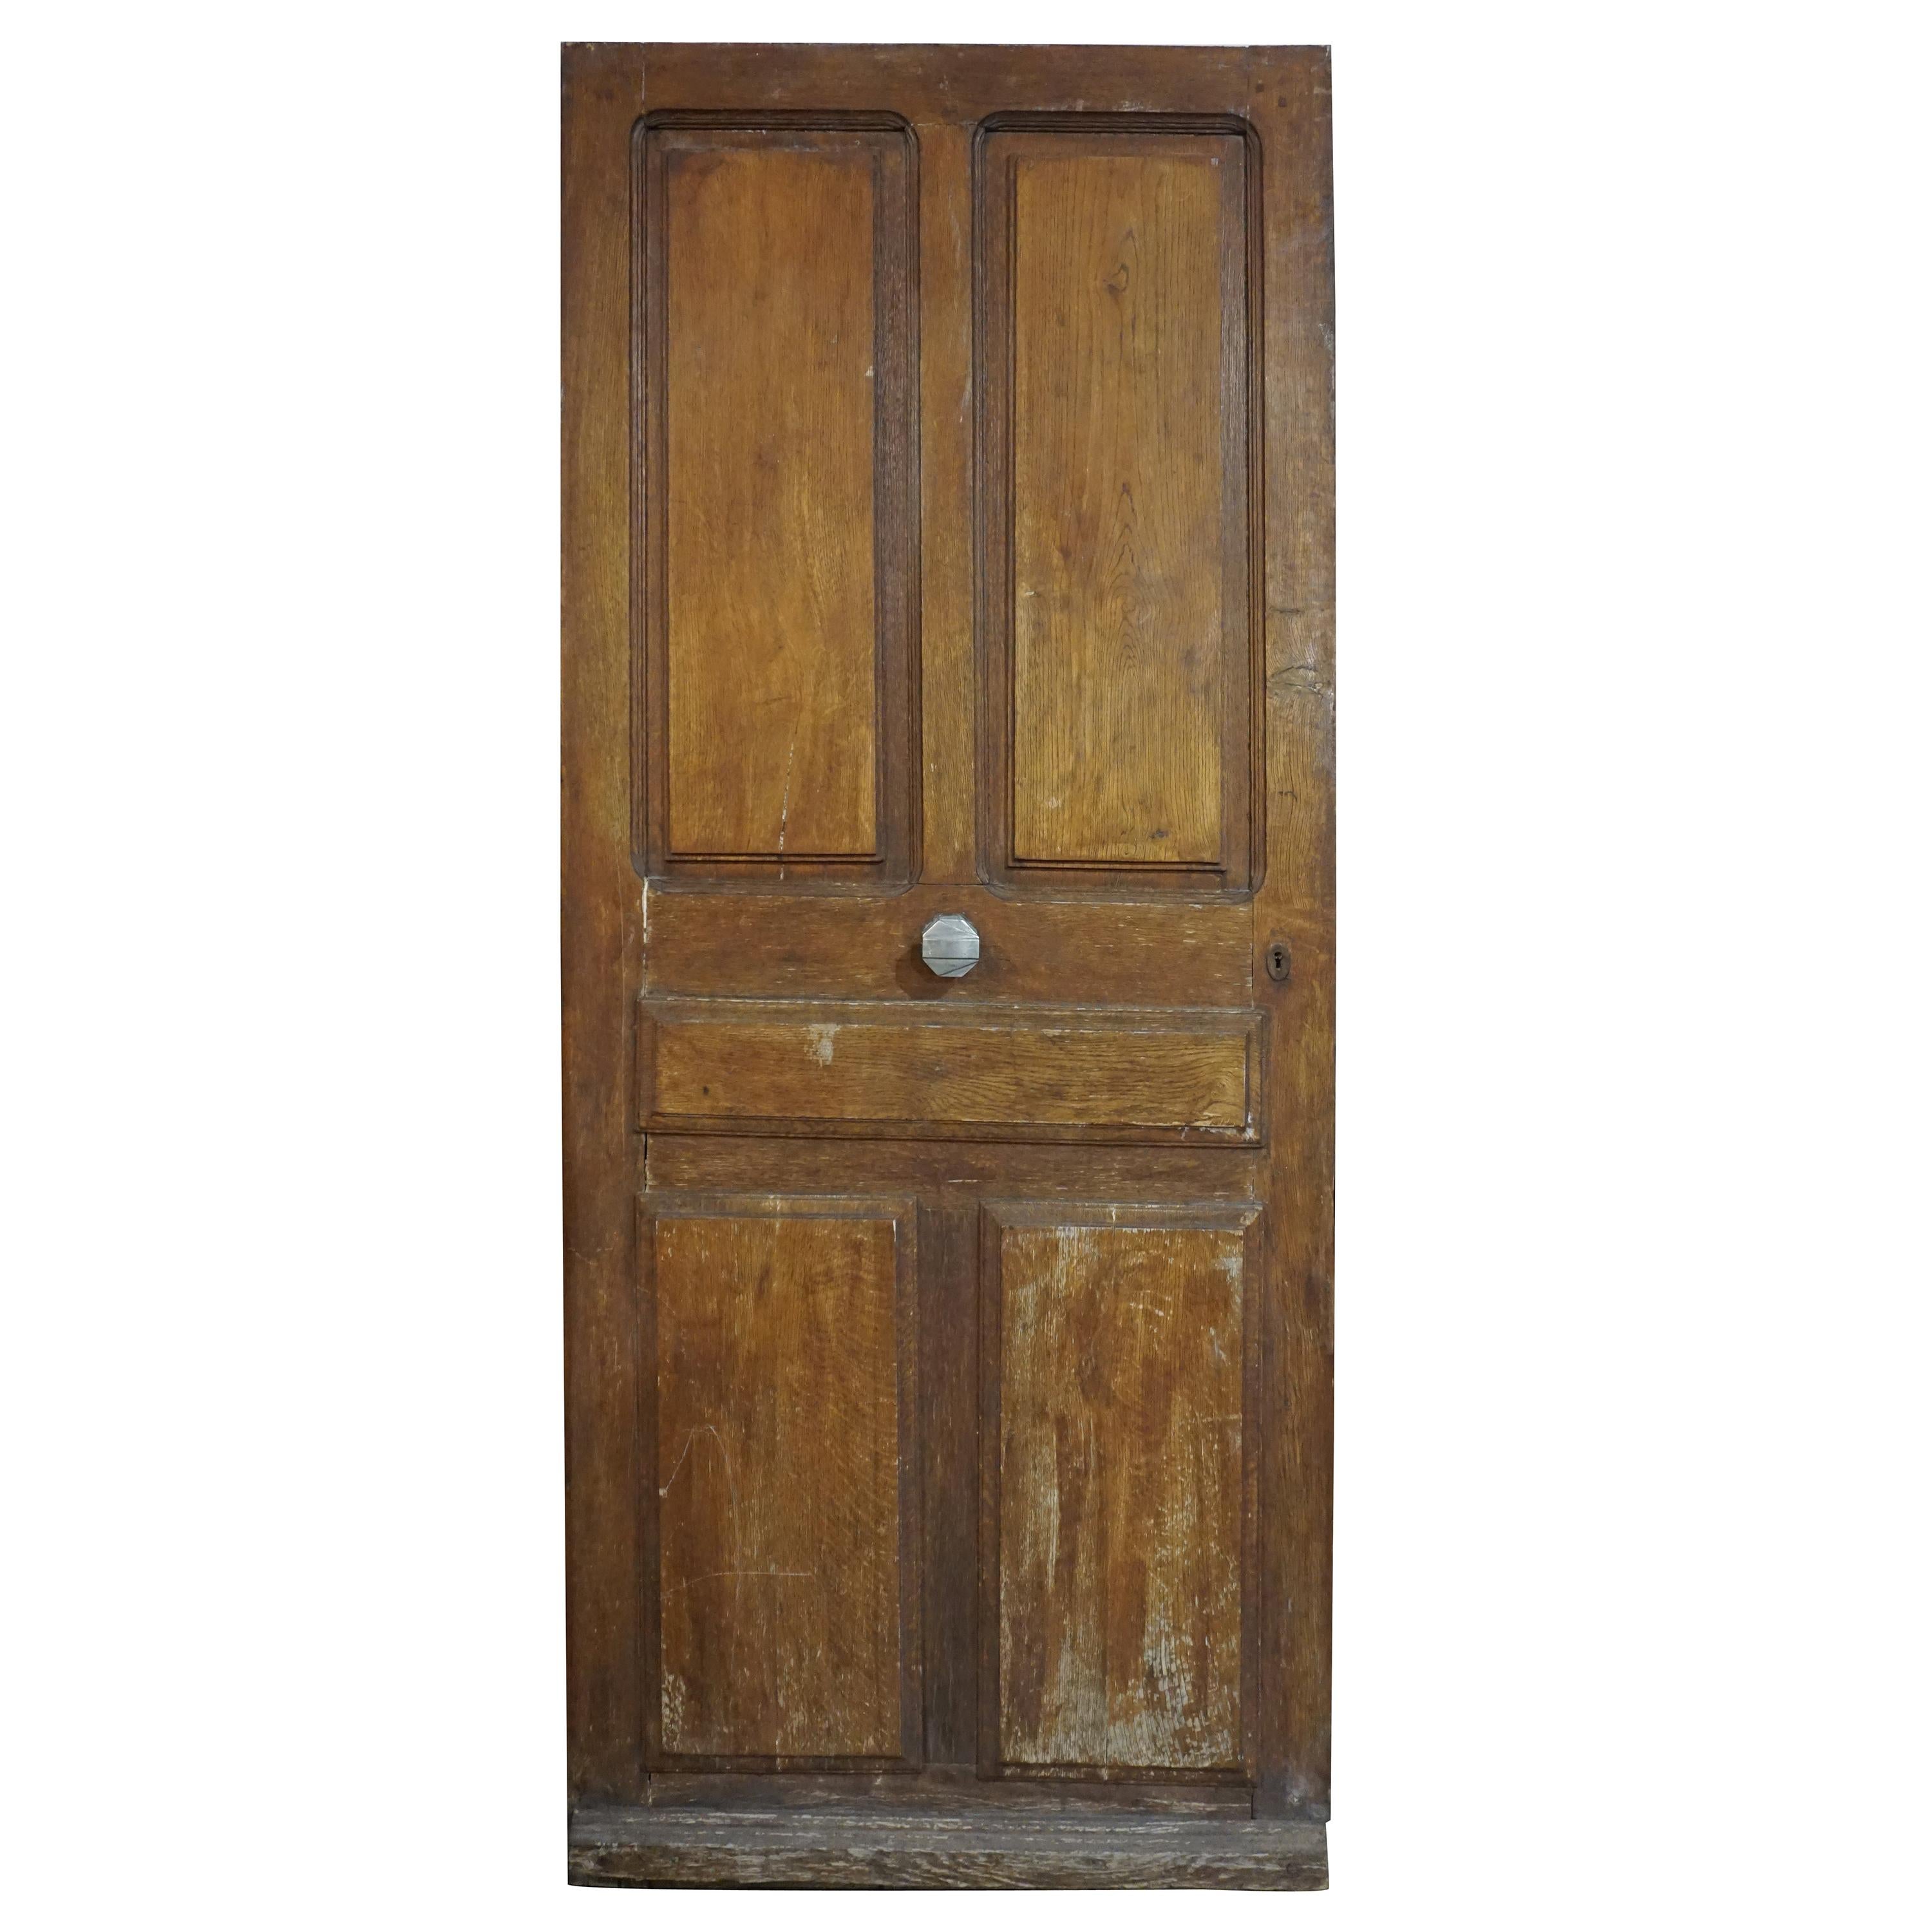 Antique French Door with Central Knob